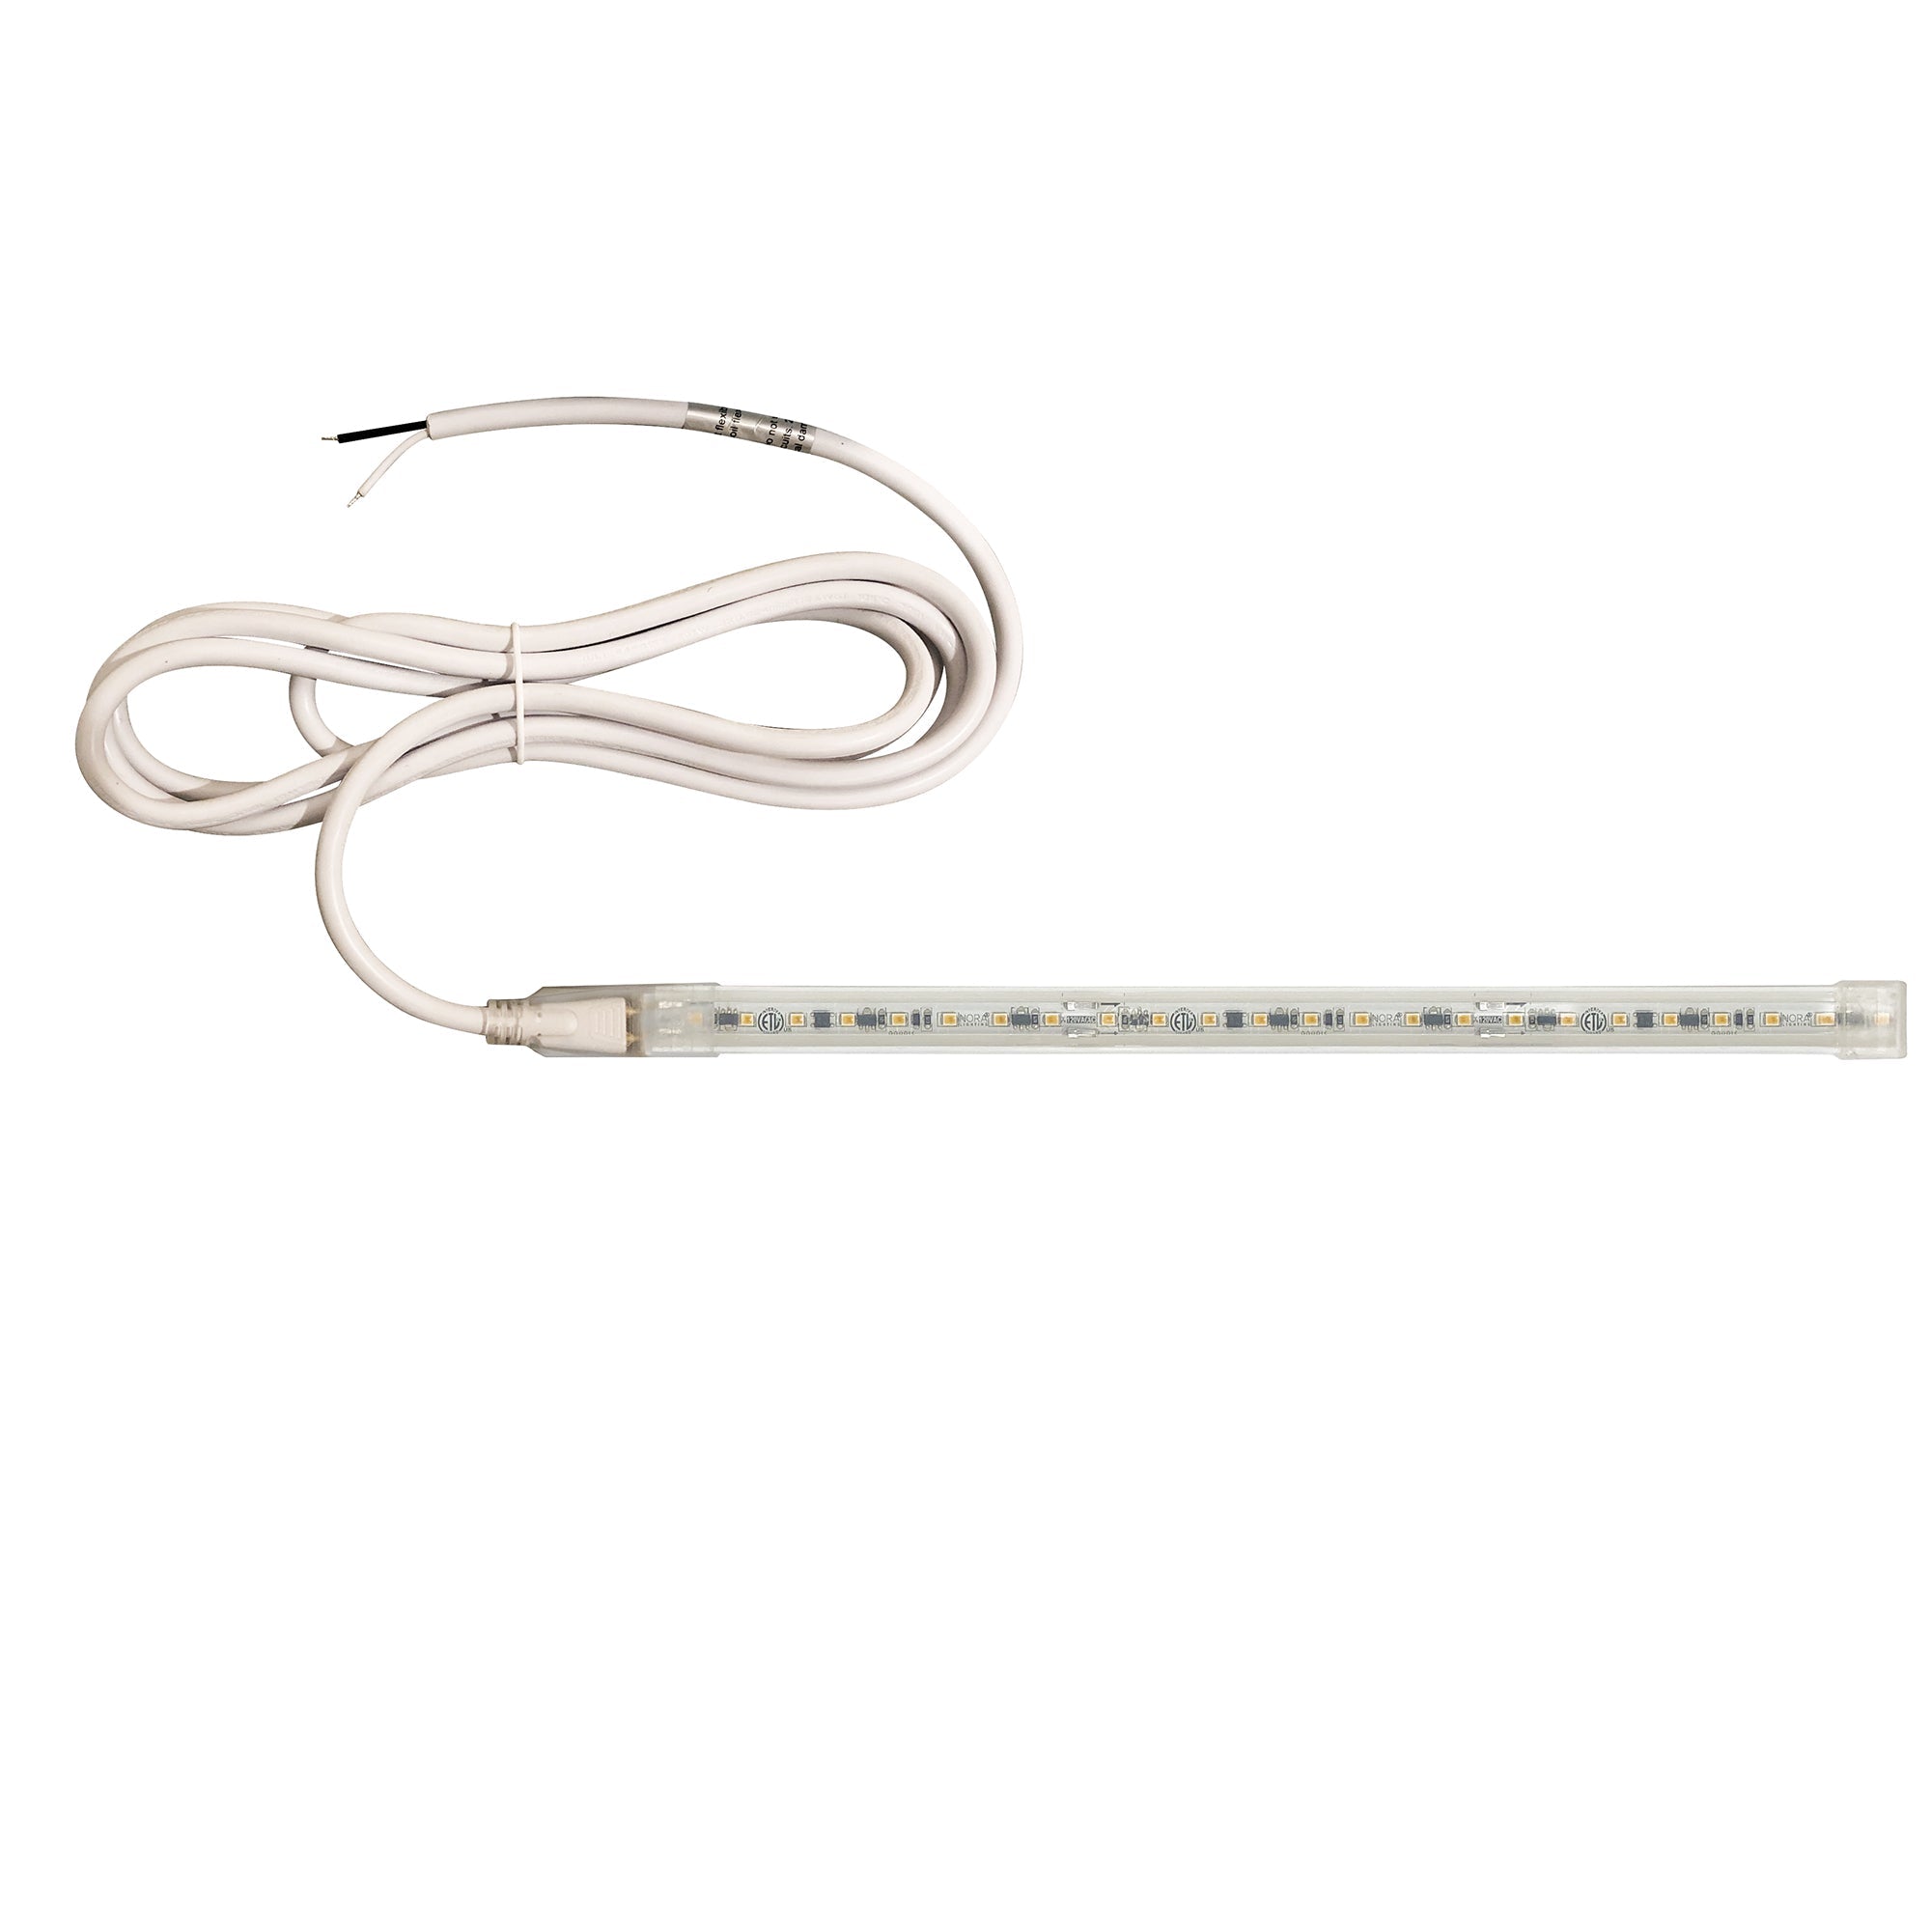 Nora Lighting NUTP13-W90-12-927/HW - Accent / Undercabinet - Custom Cut 90-ft 120V Continuous LED Tape Light, 330lm / 3.6W per foot, 2700K, w/ Mounting Clips and 8' Hardwired Power Cord